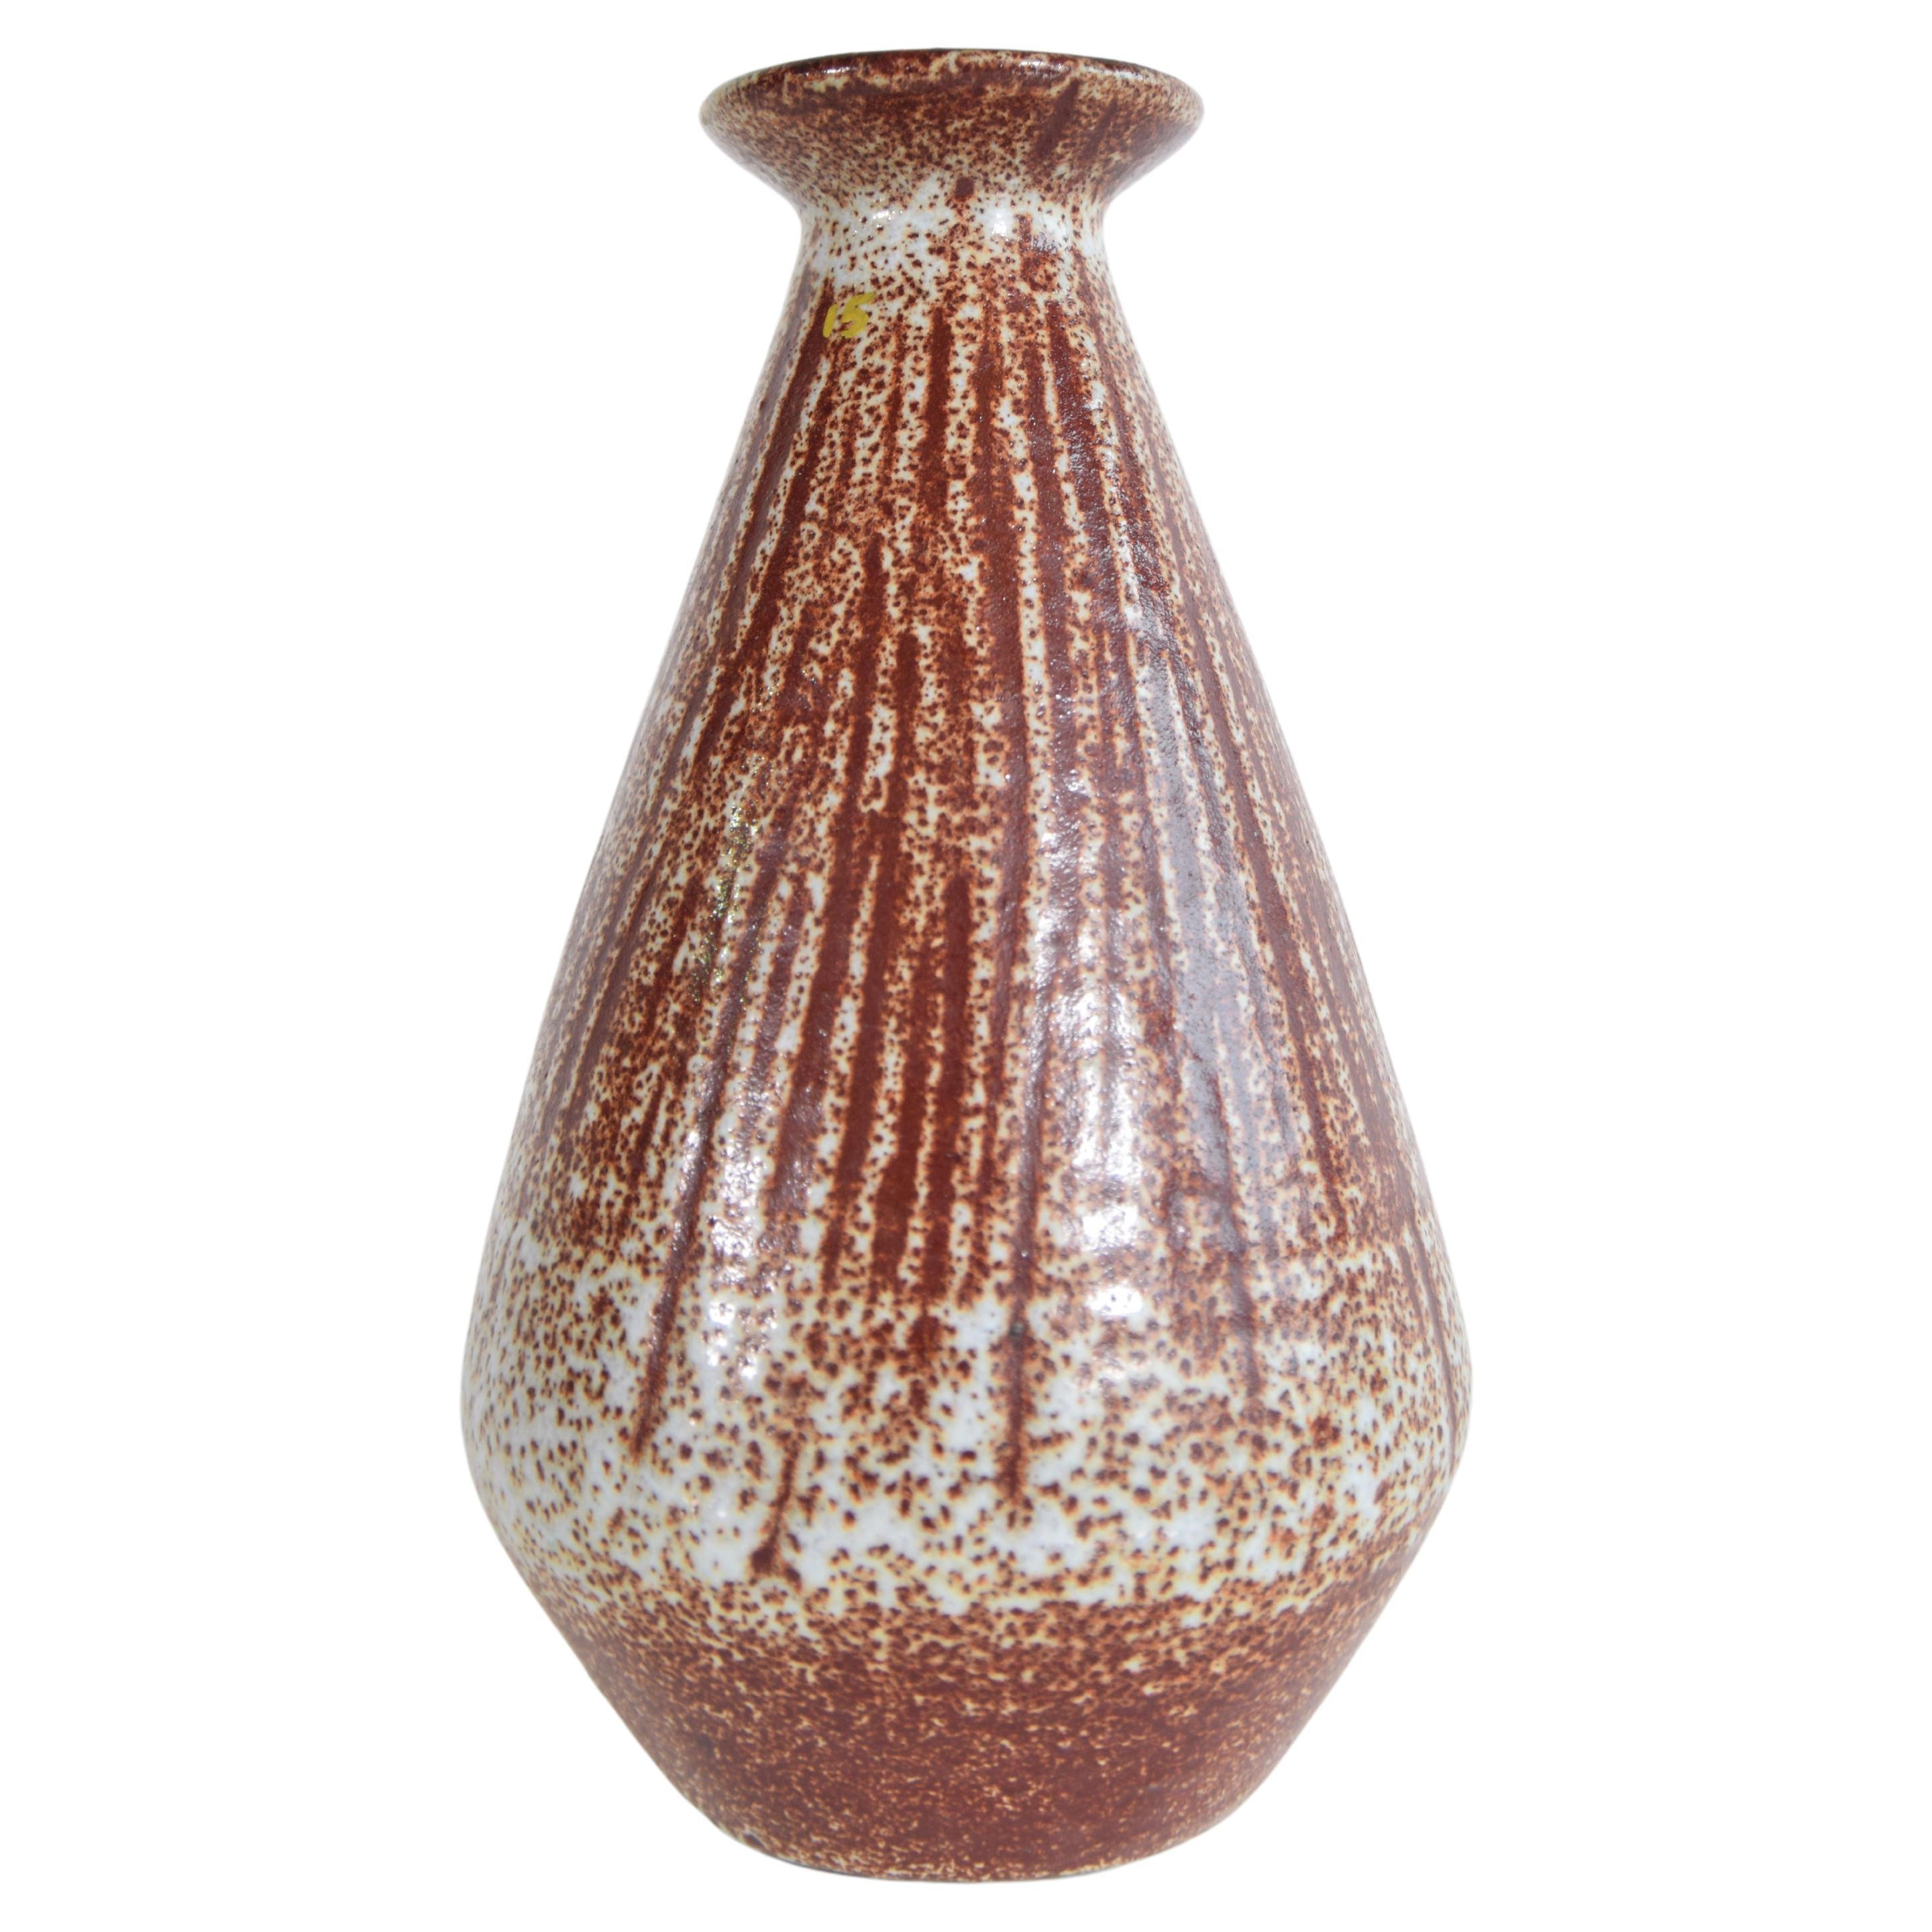 Accolay Pottery Vase from France